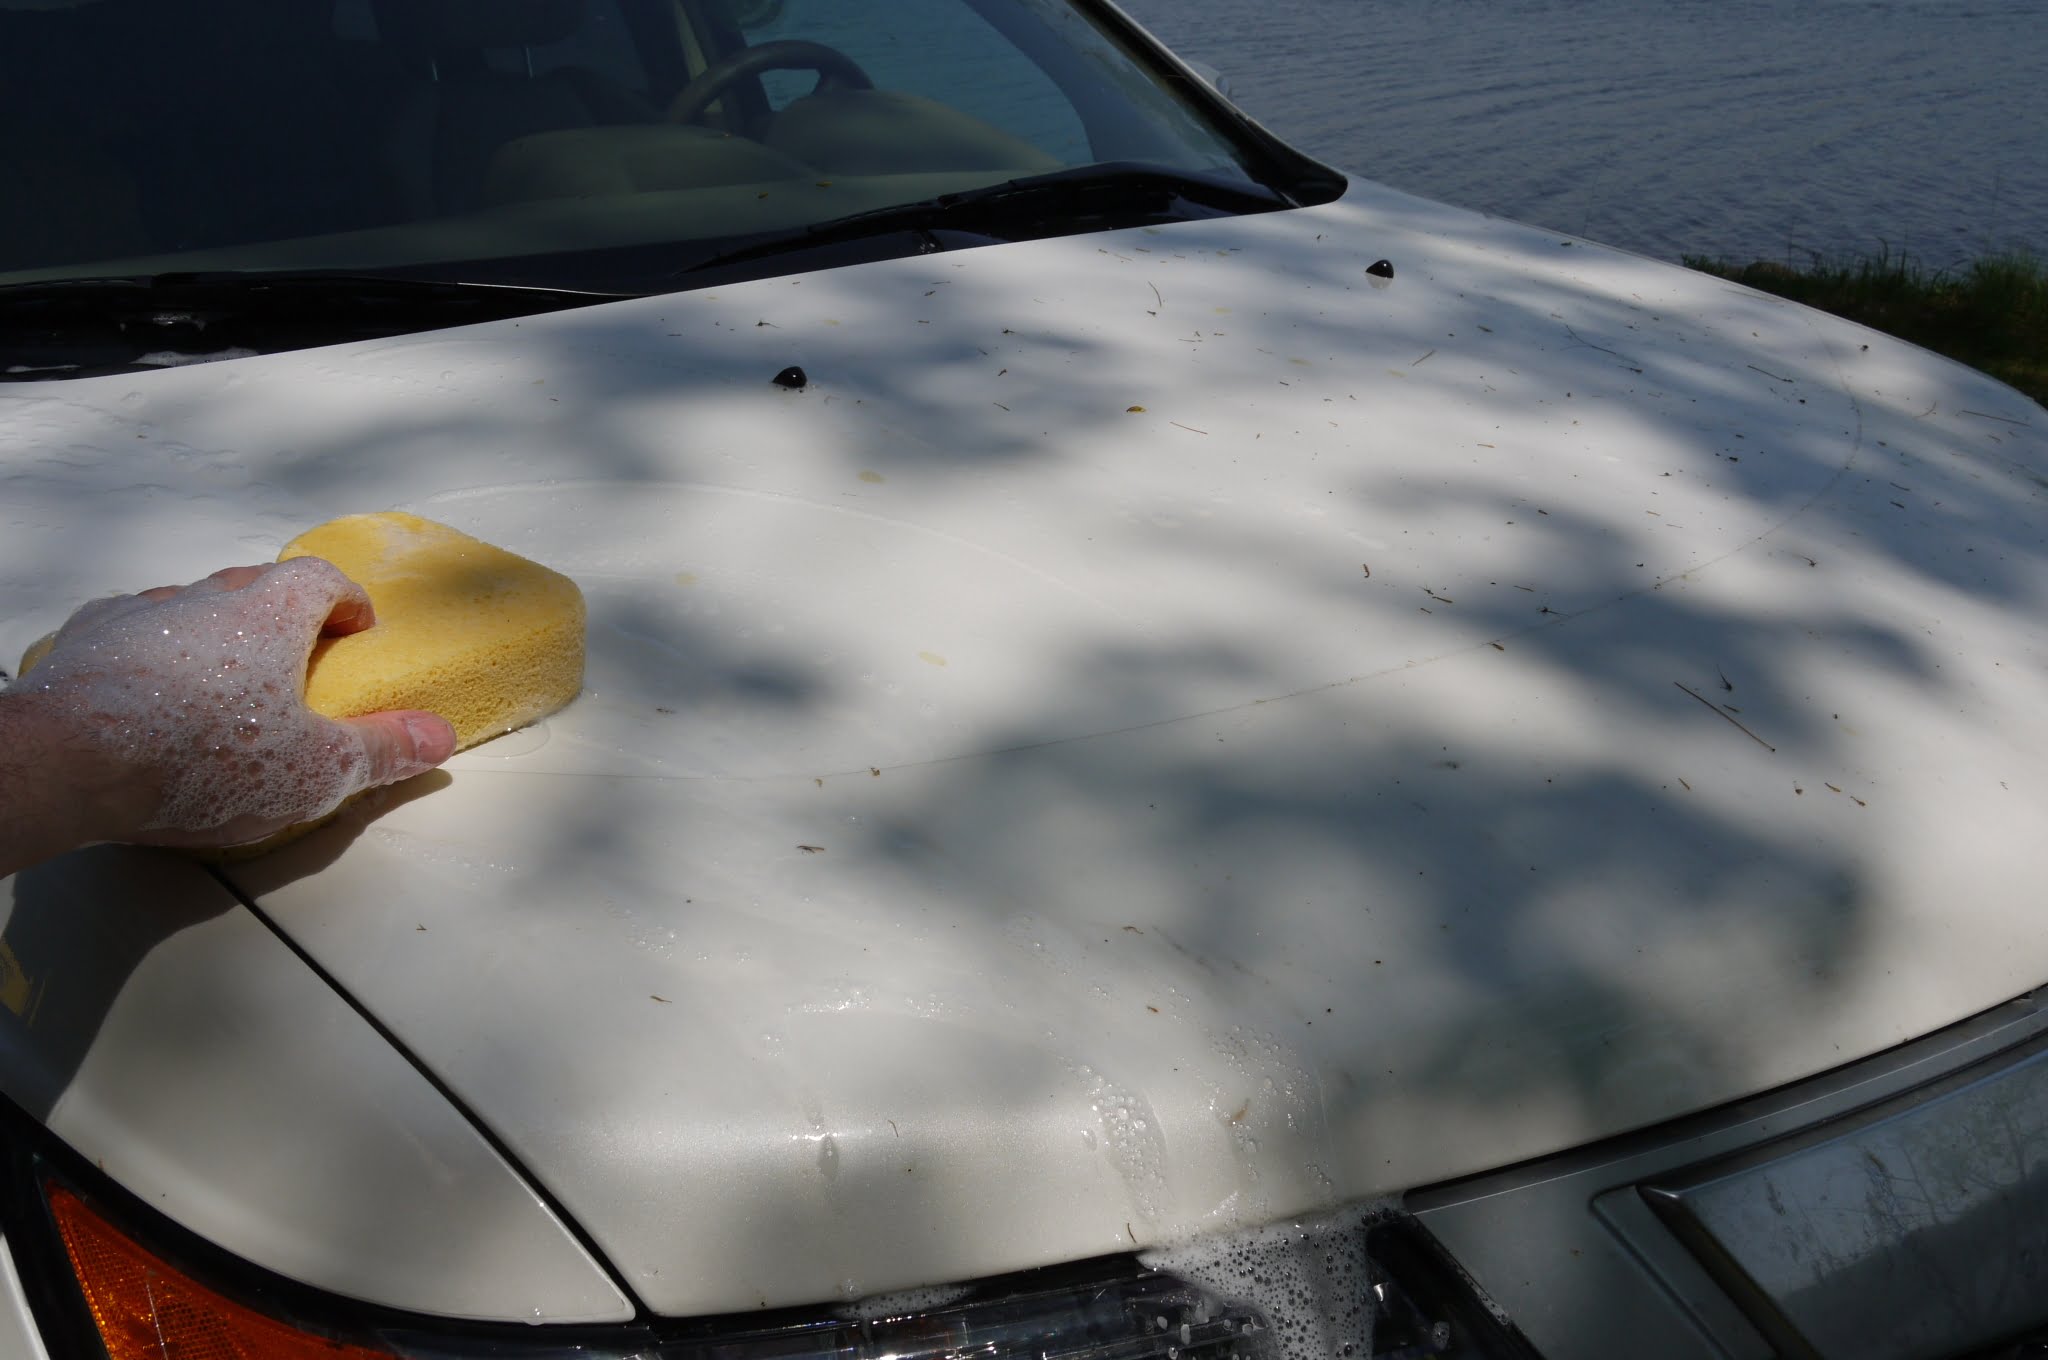 How to get tree sap off your car